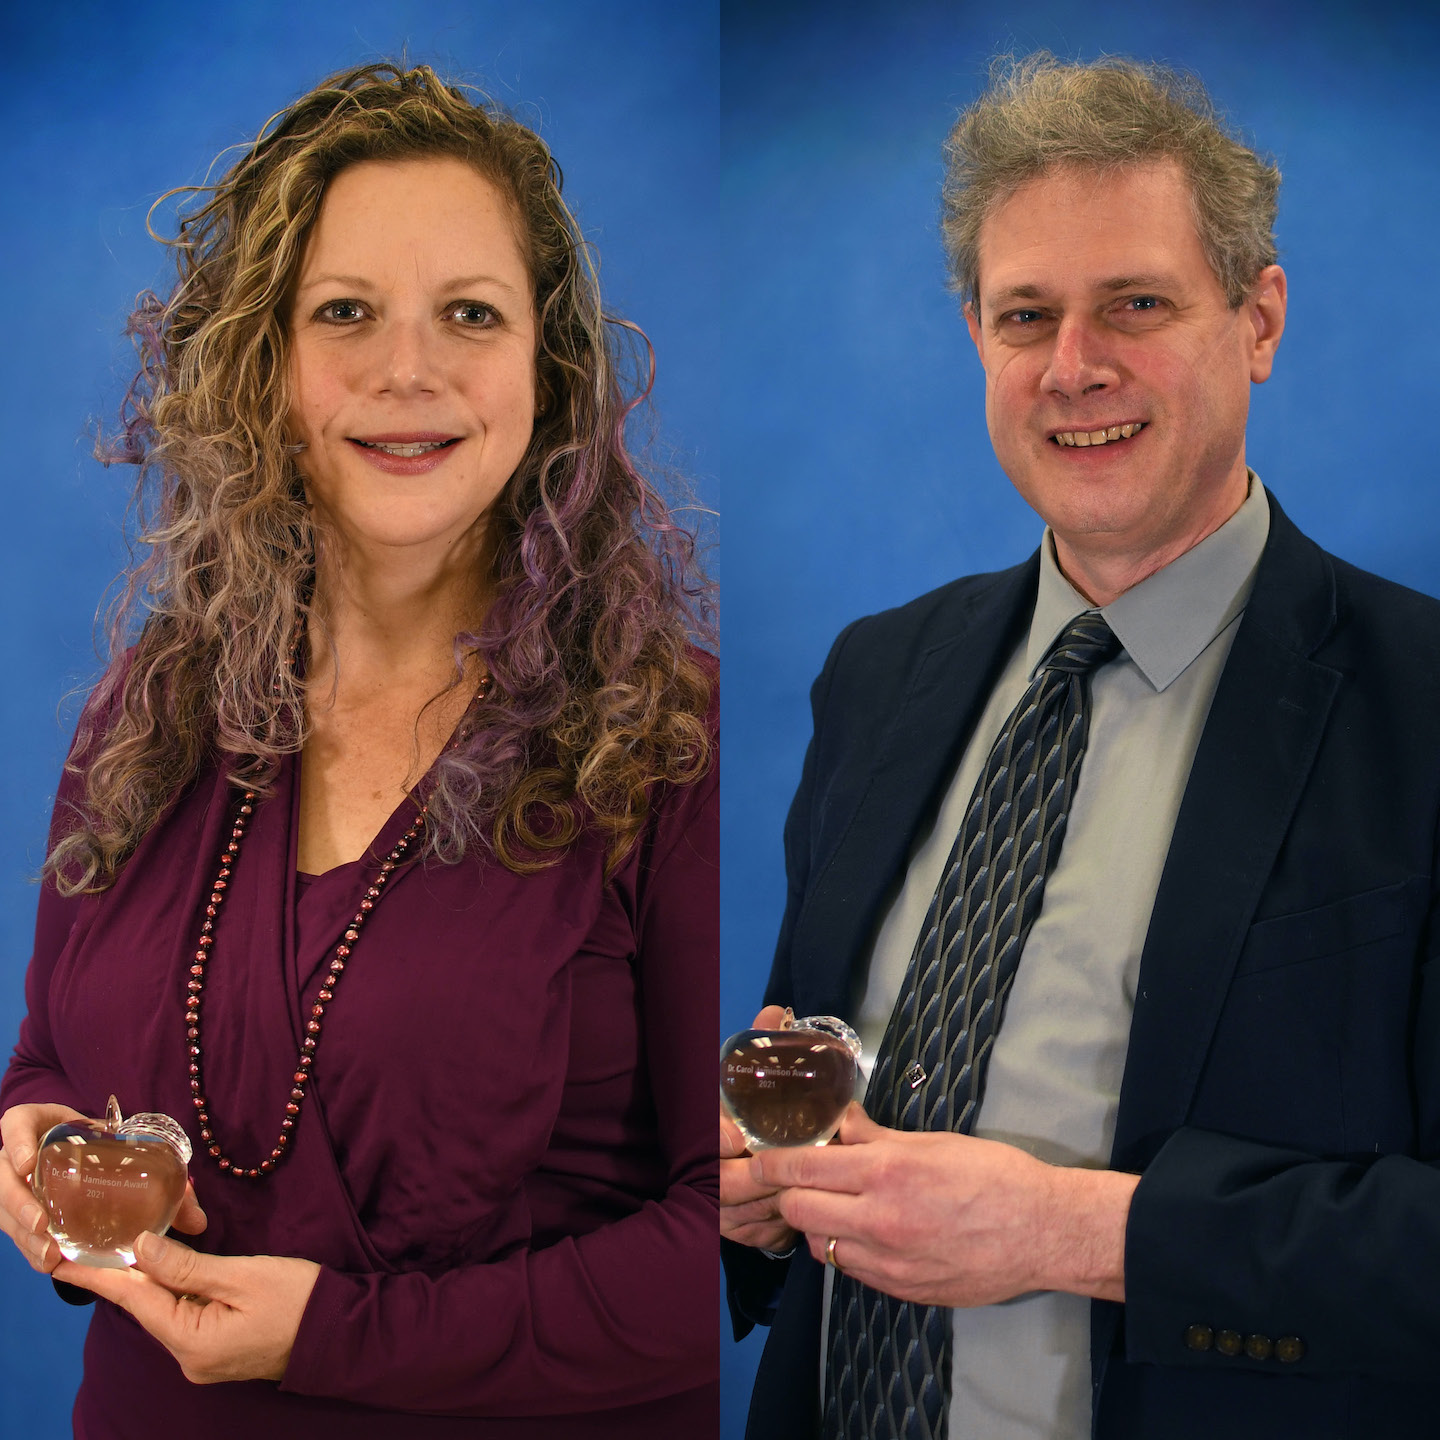 Carolyn Stanko and Dr. Matthew Clarcq are recipients of the Dr. Carol Jamieson Award at Niagara County Community College. (Submitted photos)